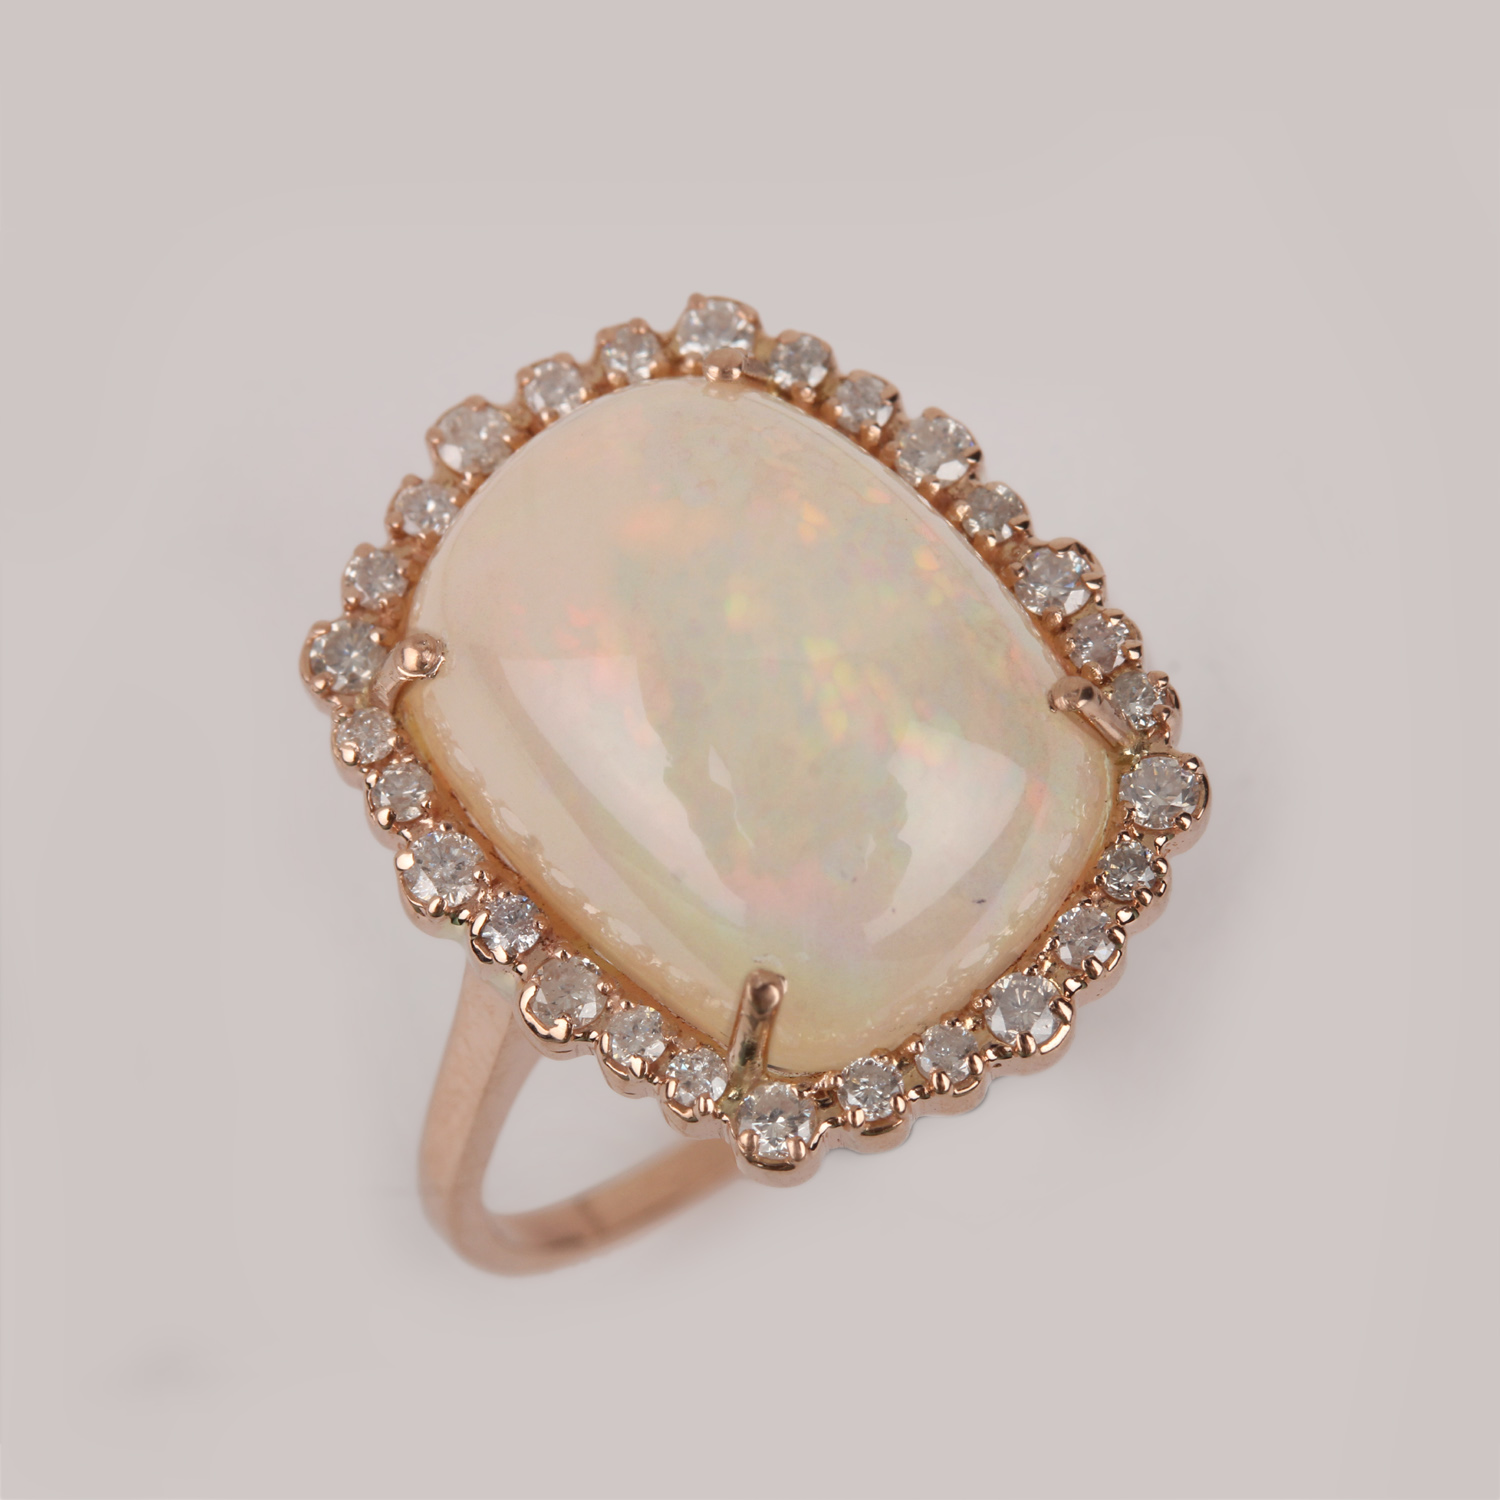 Pave Diamond Opal Gemstone 14K Solid Gold Cocktail Ring Fine Jewelry